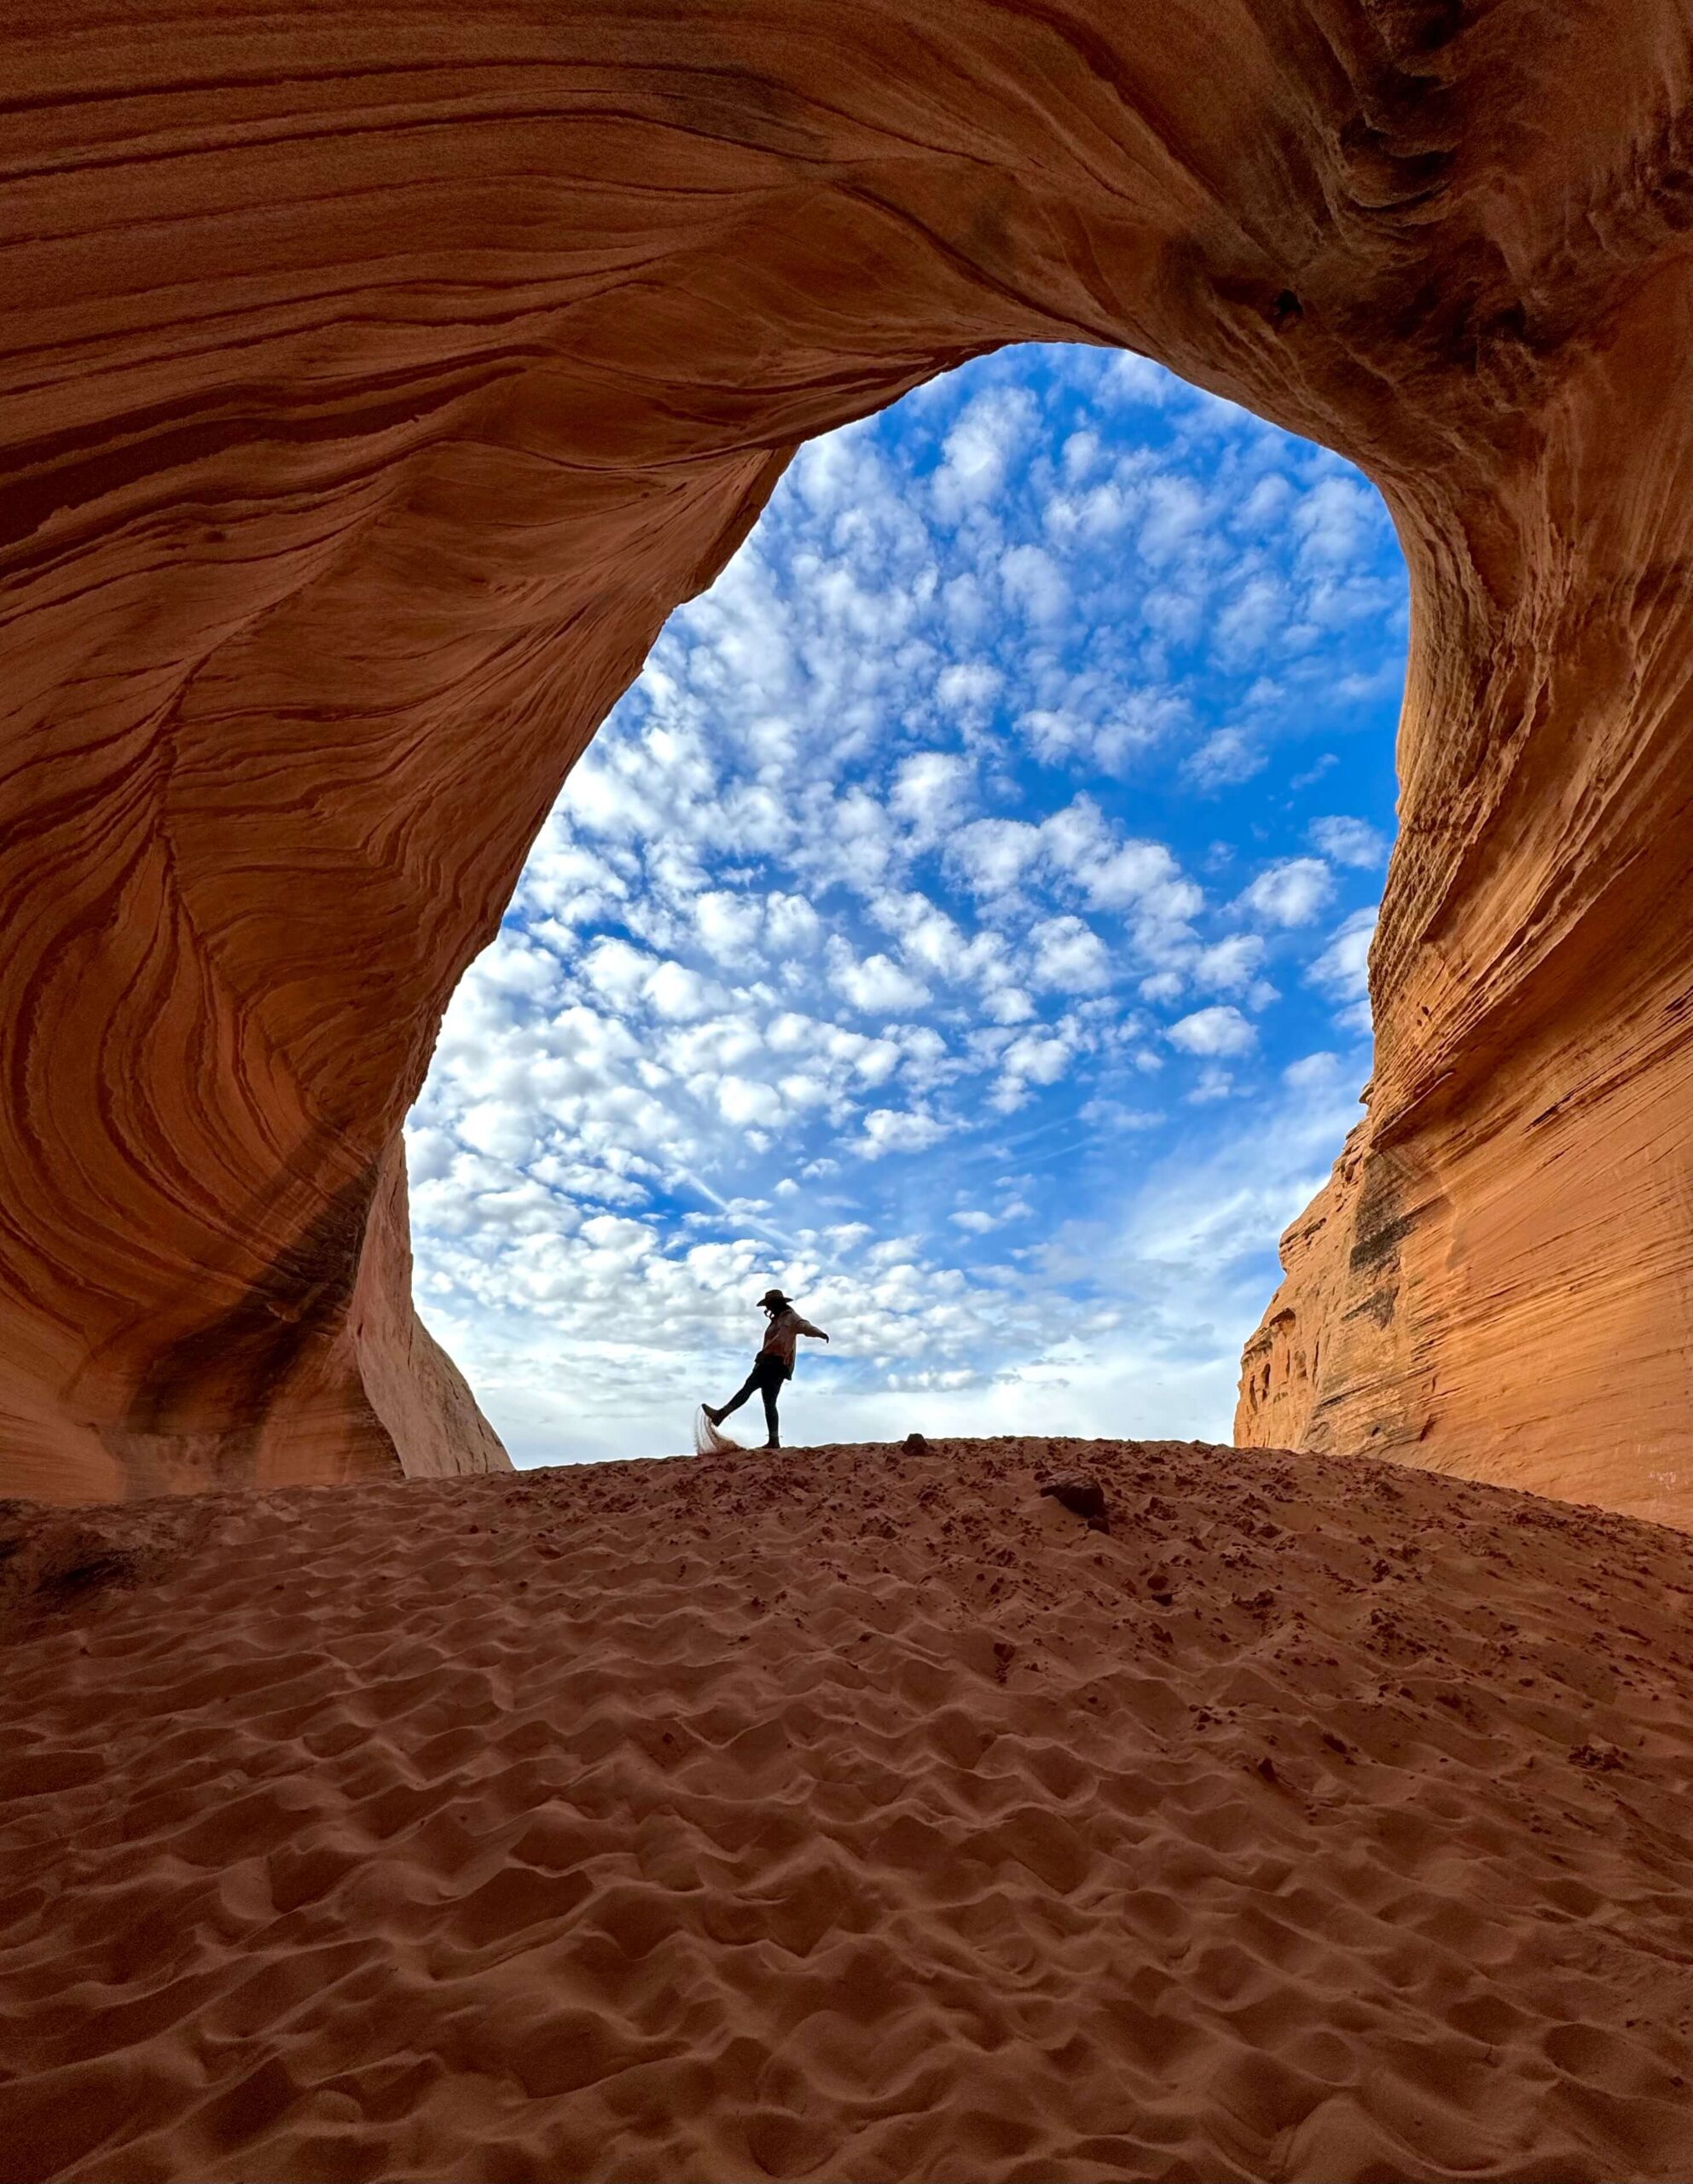 how to find this epic cave in page arizona